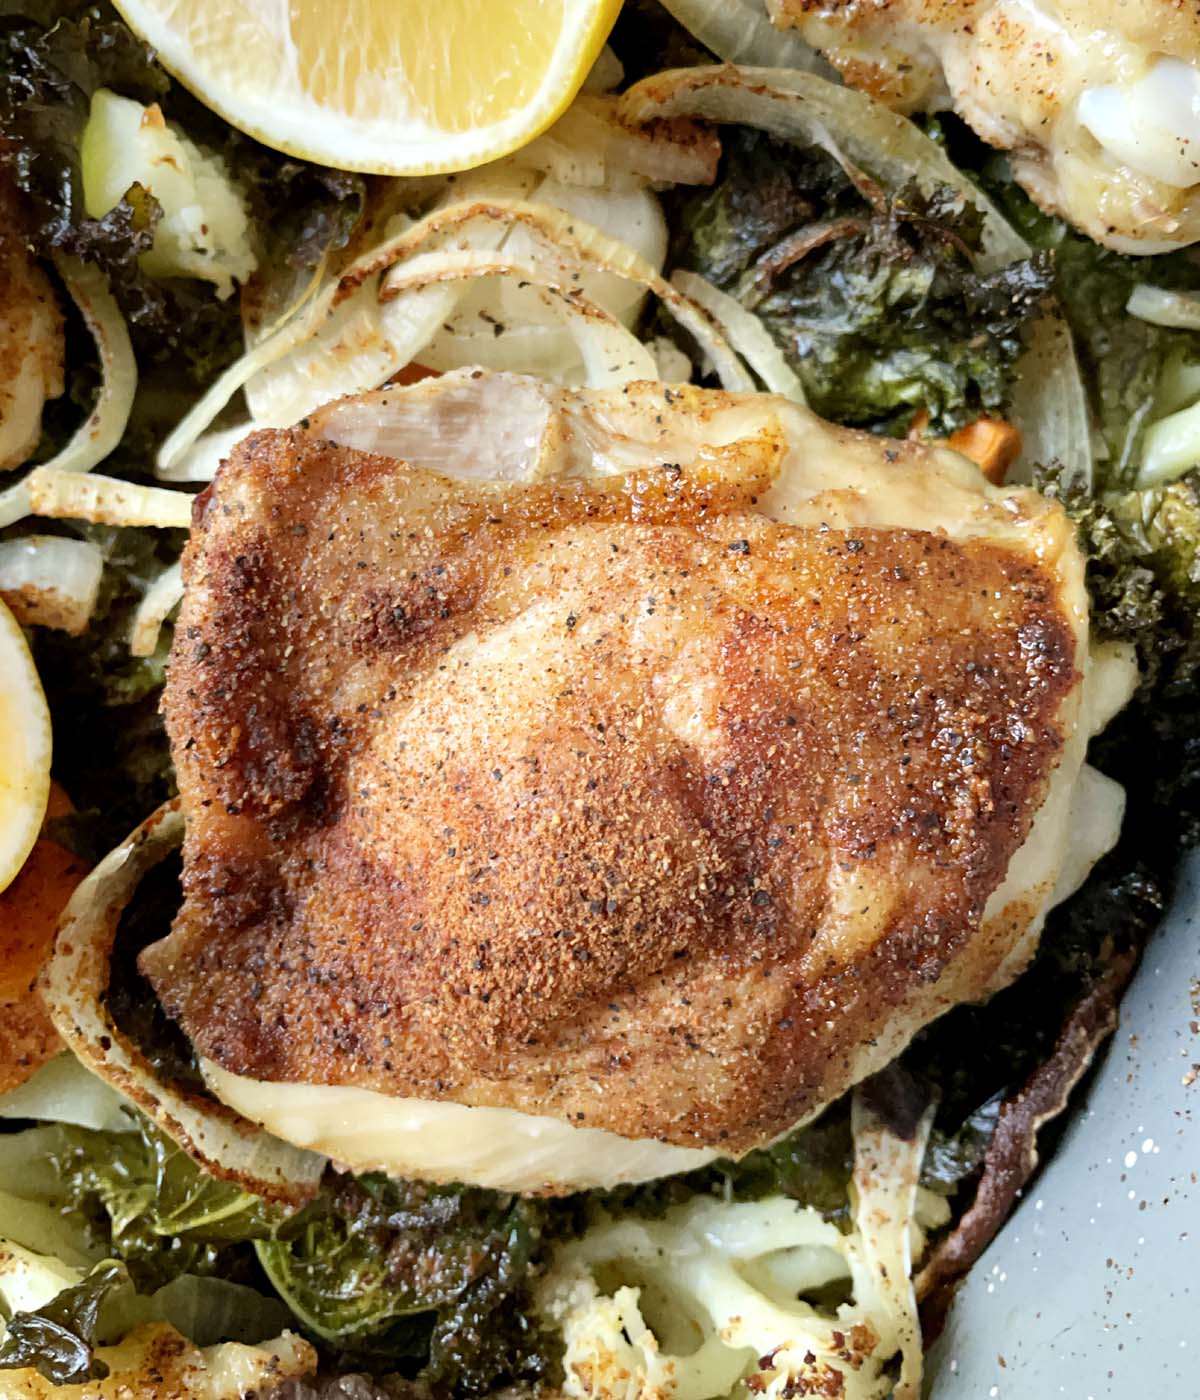 Close-up of a roasted piece of chicken on a bed of onions and vegetables in a pan.